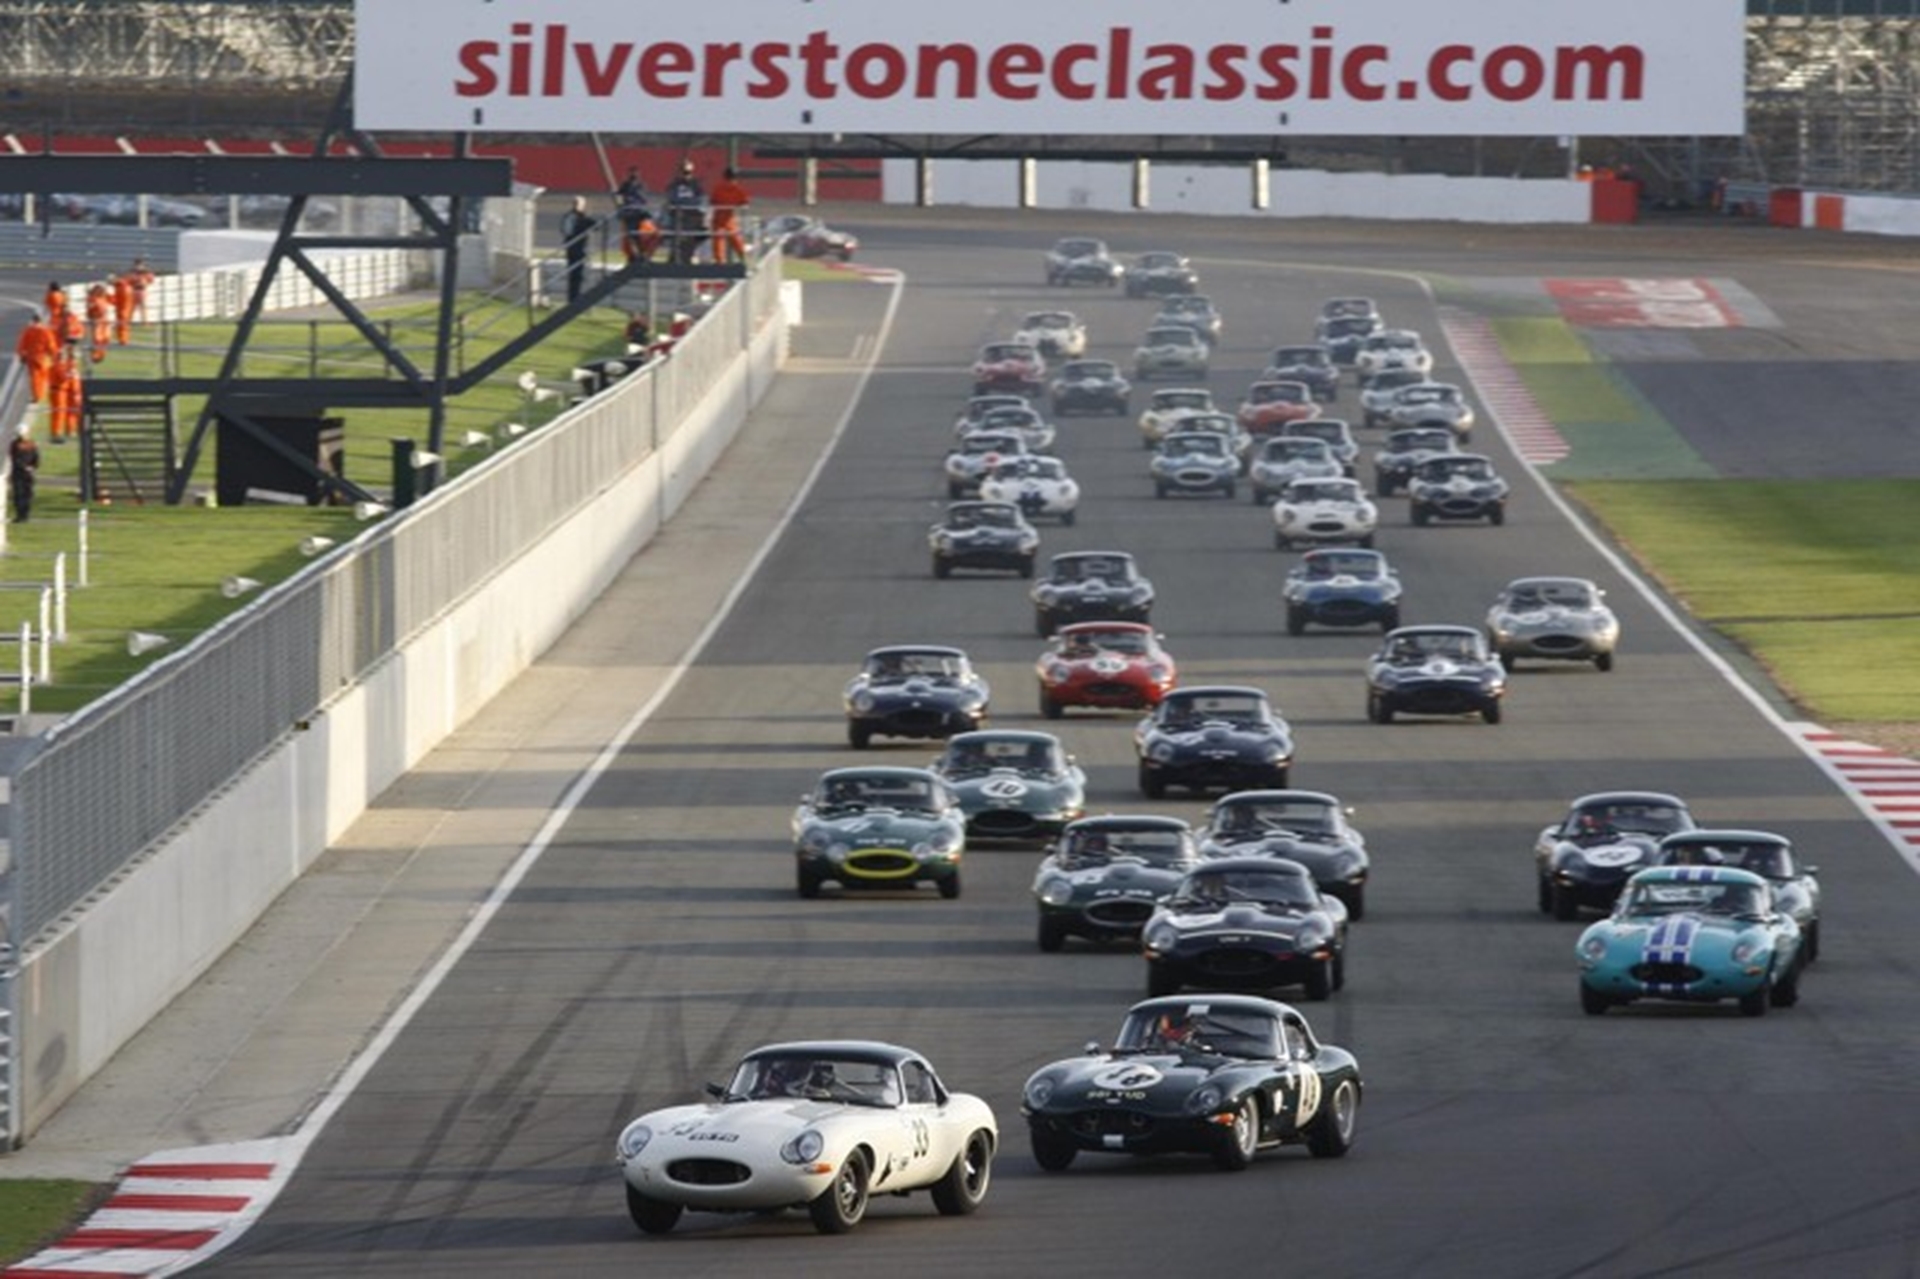 Jaguars all set to Roar Once Again at Silverstone